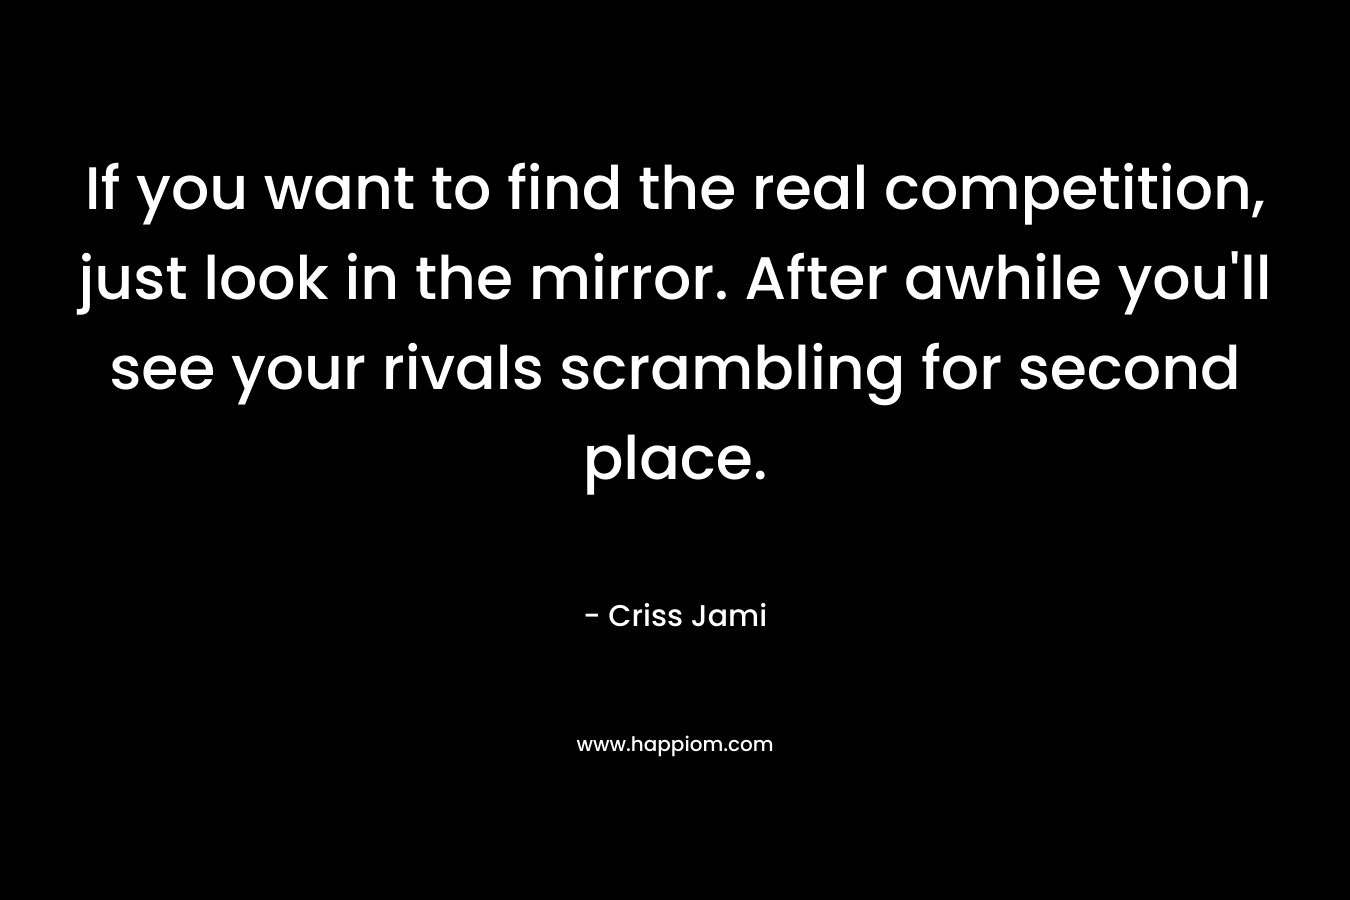 If you want to find the real competition, just look in the mirror. After awhile you’ll see your rivals scrambling for second place. – Criss Jami